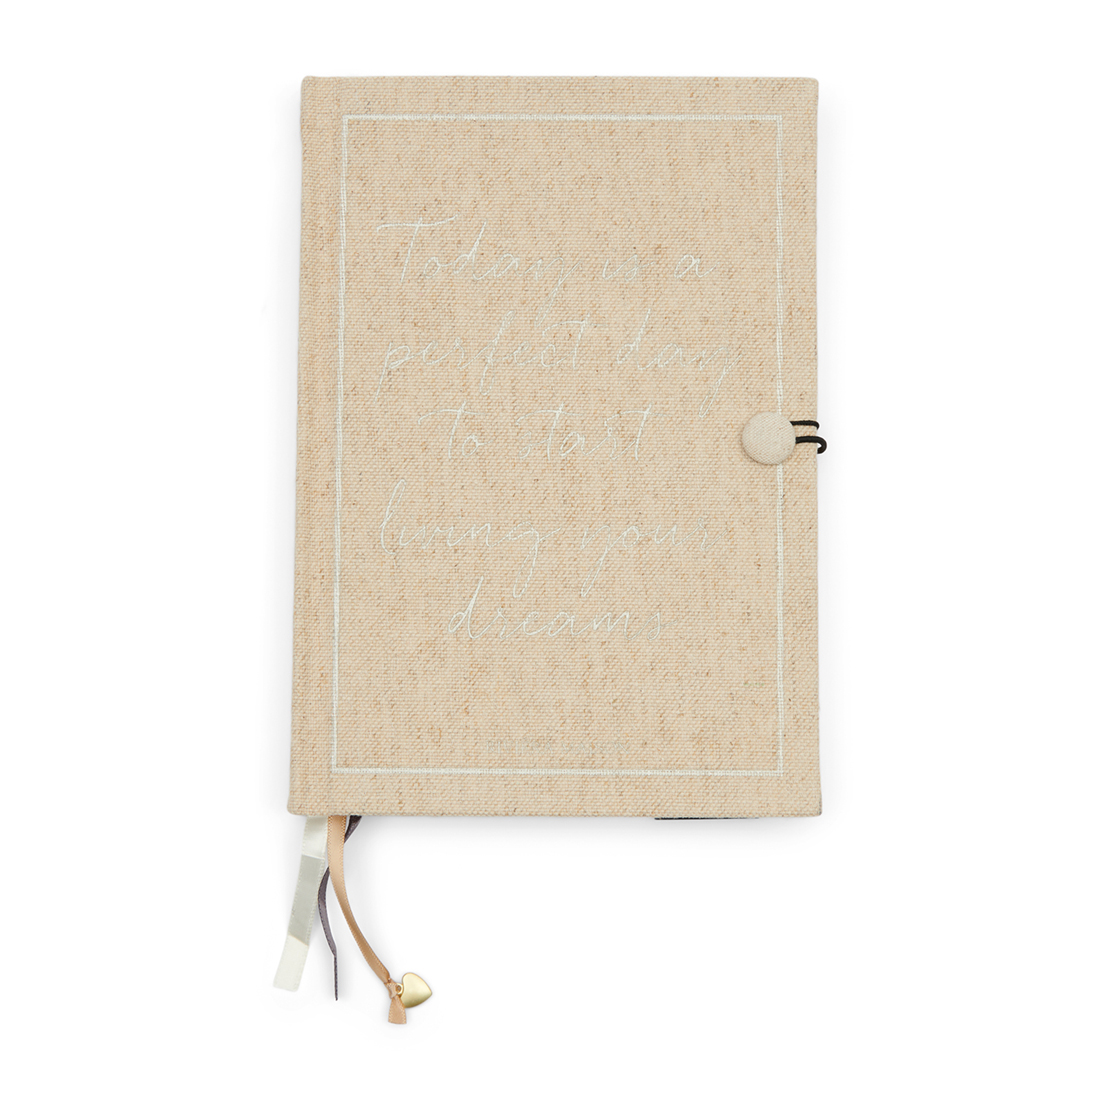 Riviera Maison Notebooks - Perfect Day A5 Notebook - Beige